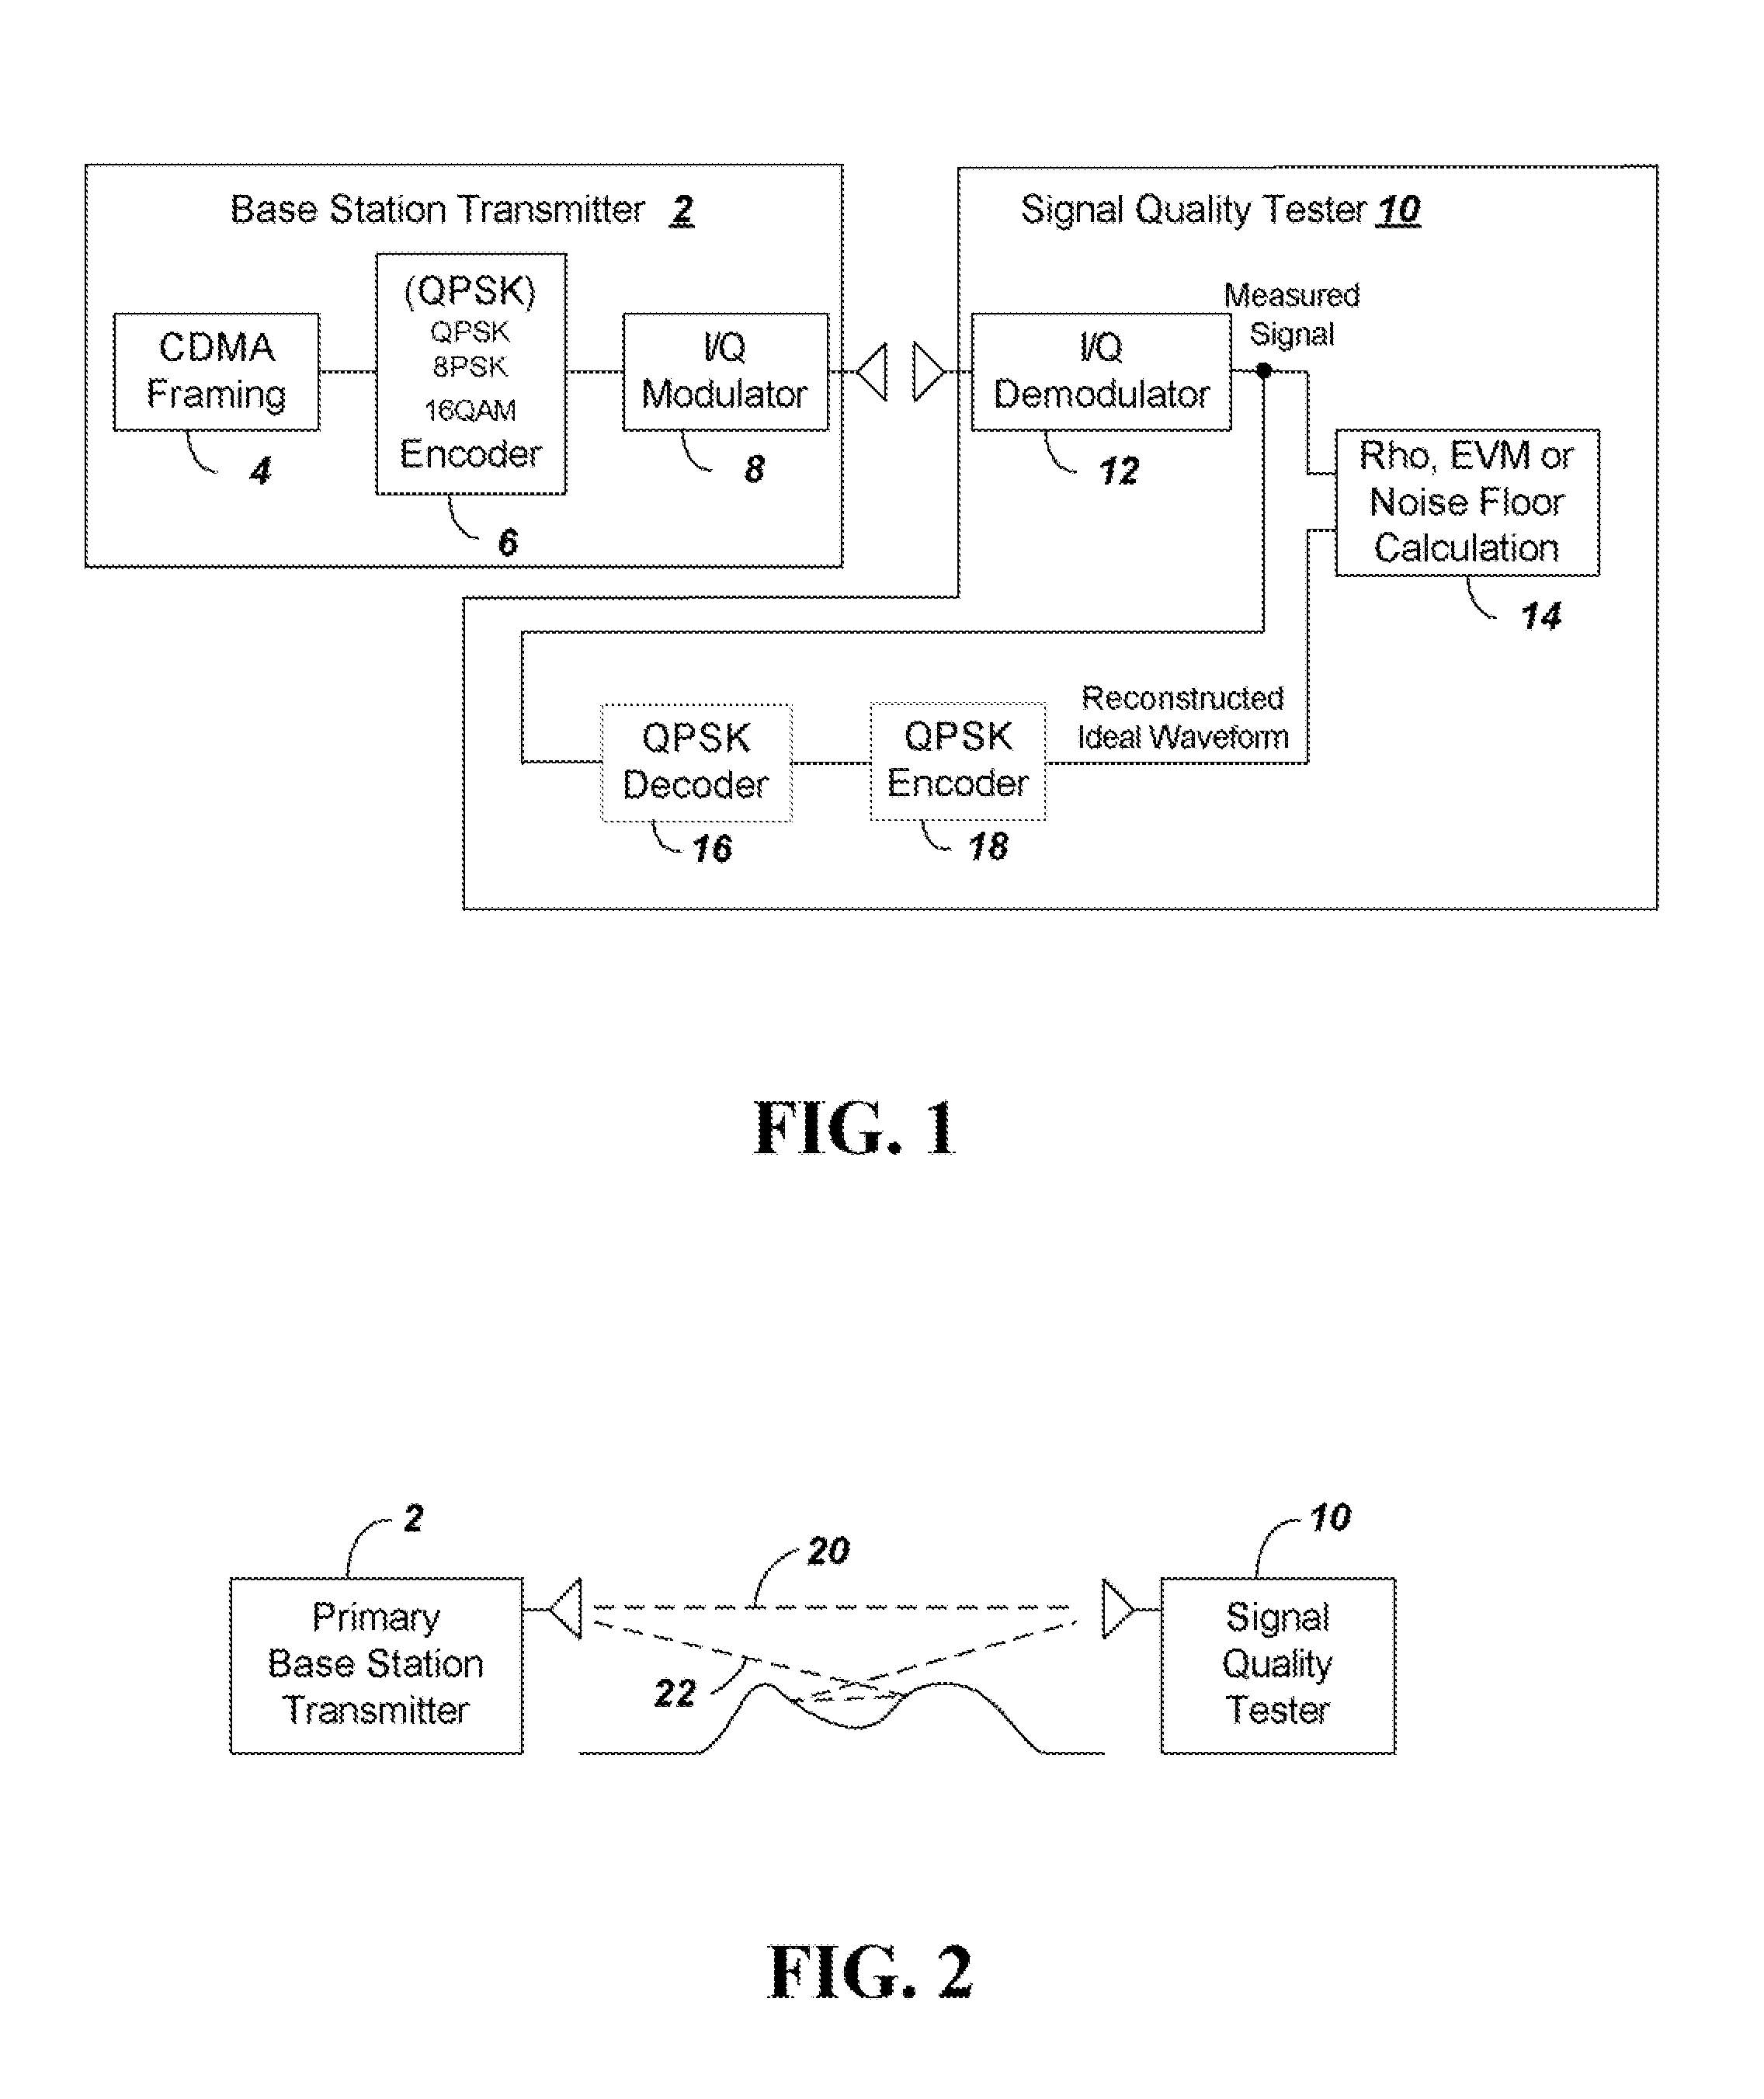 Method and apparatus to estimate wireless base station signal quality over the air